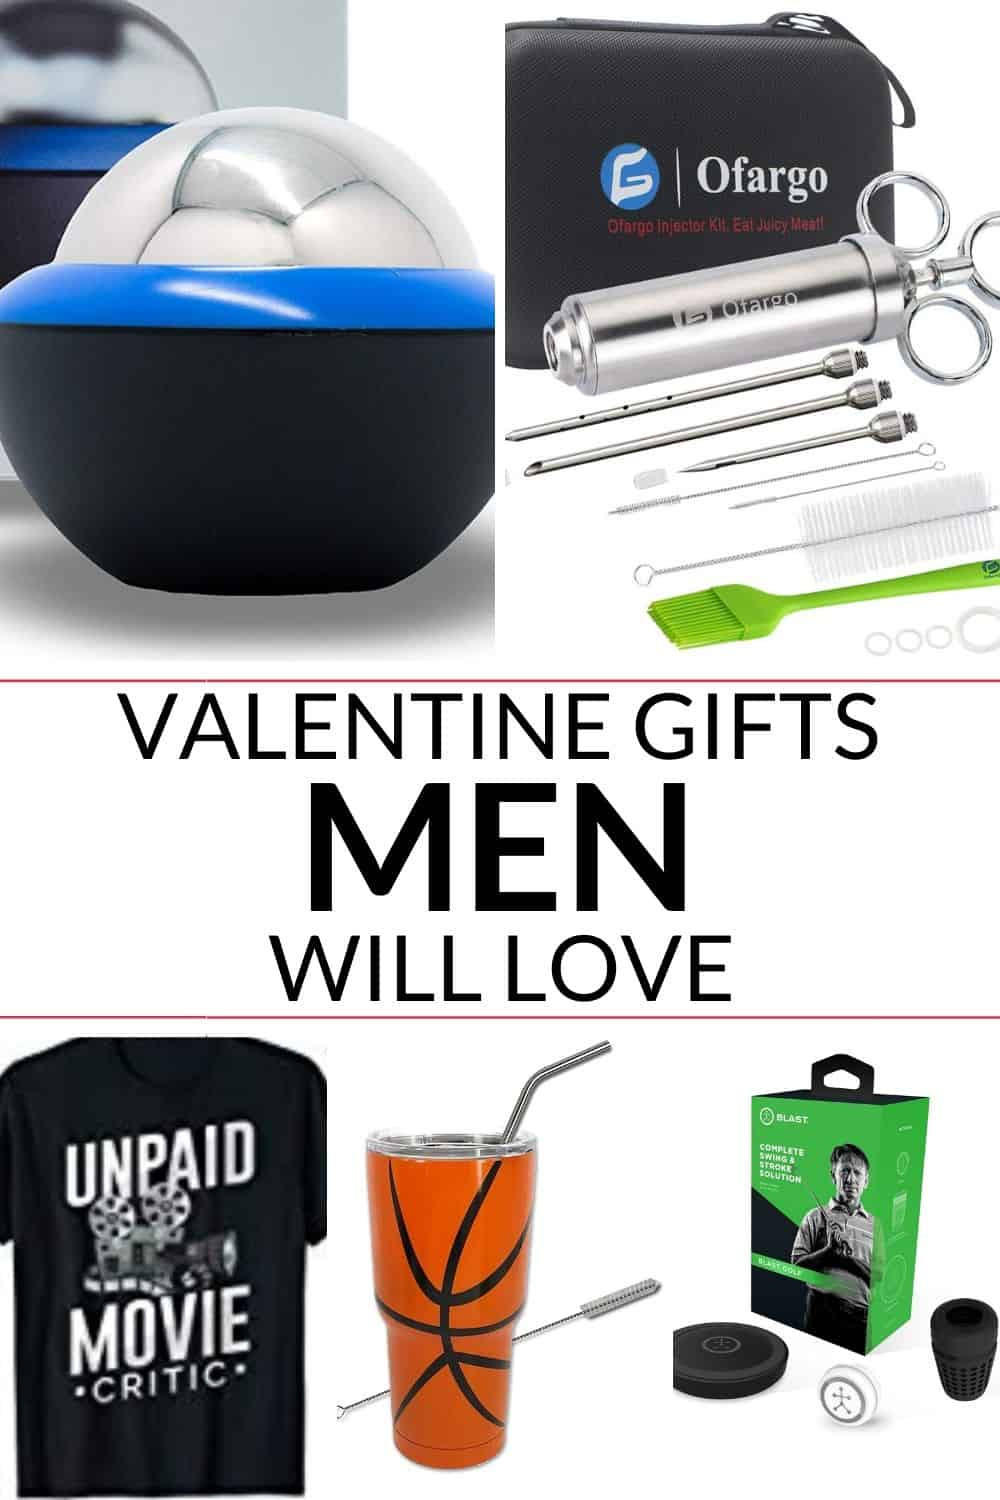 Valentines Gift Ideas For Husband
 Valentine Gift for Husband Great ideas